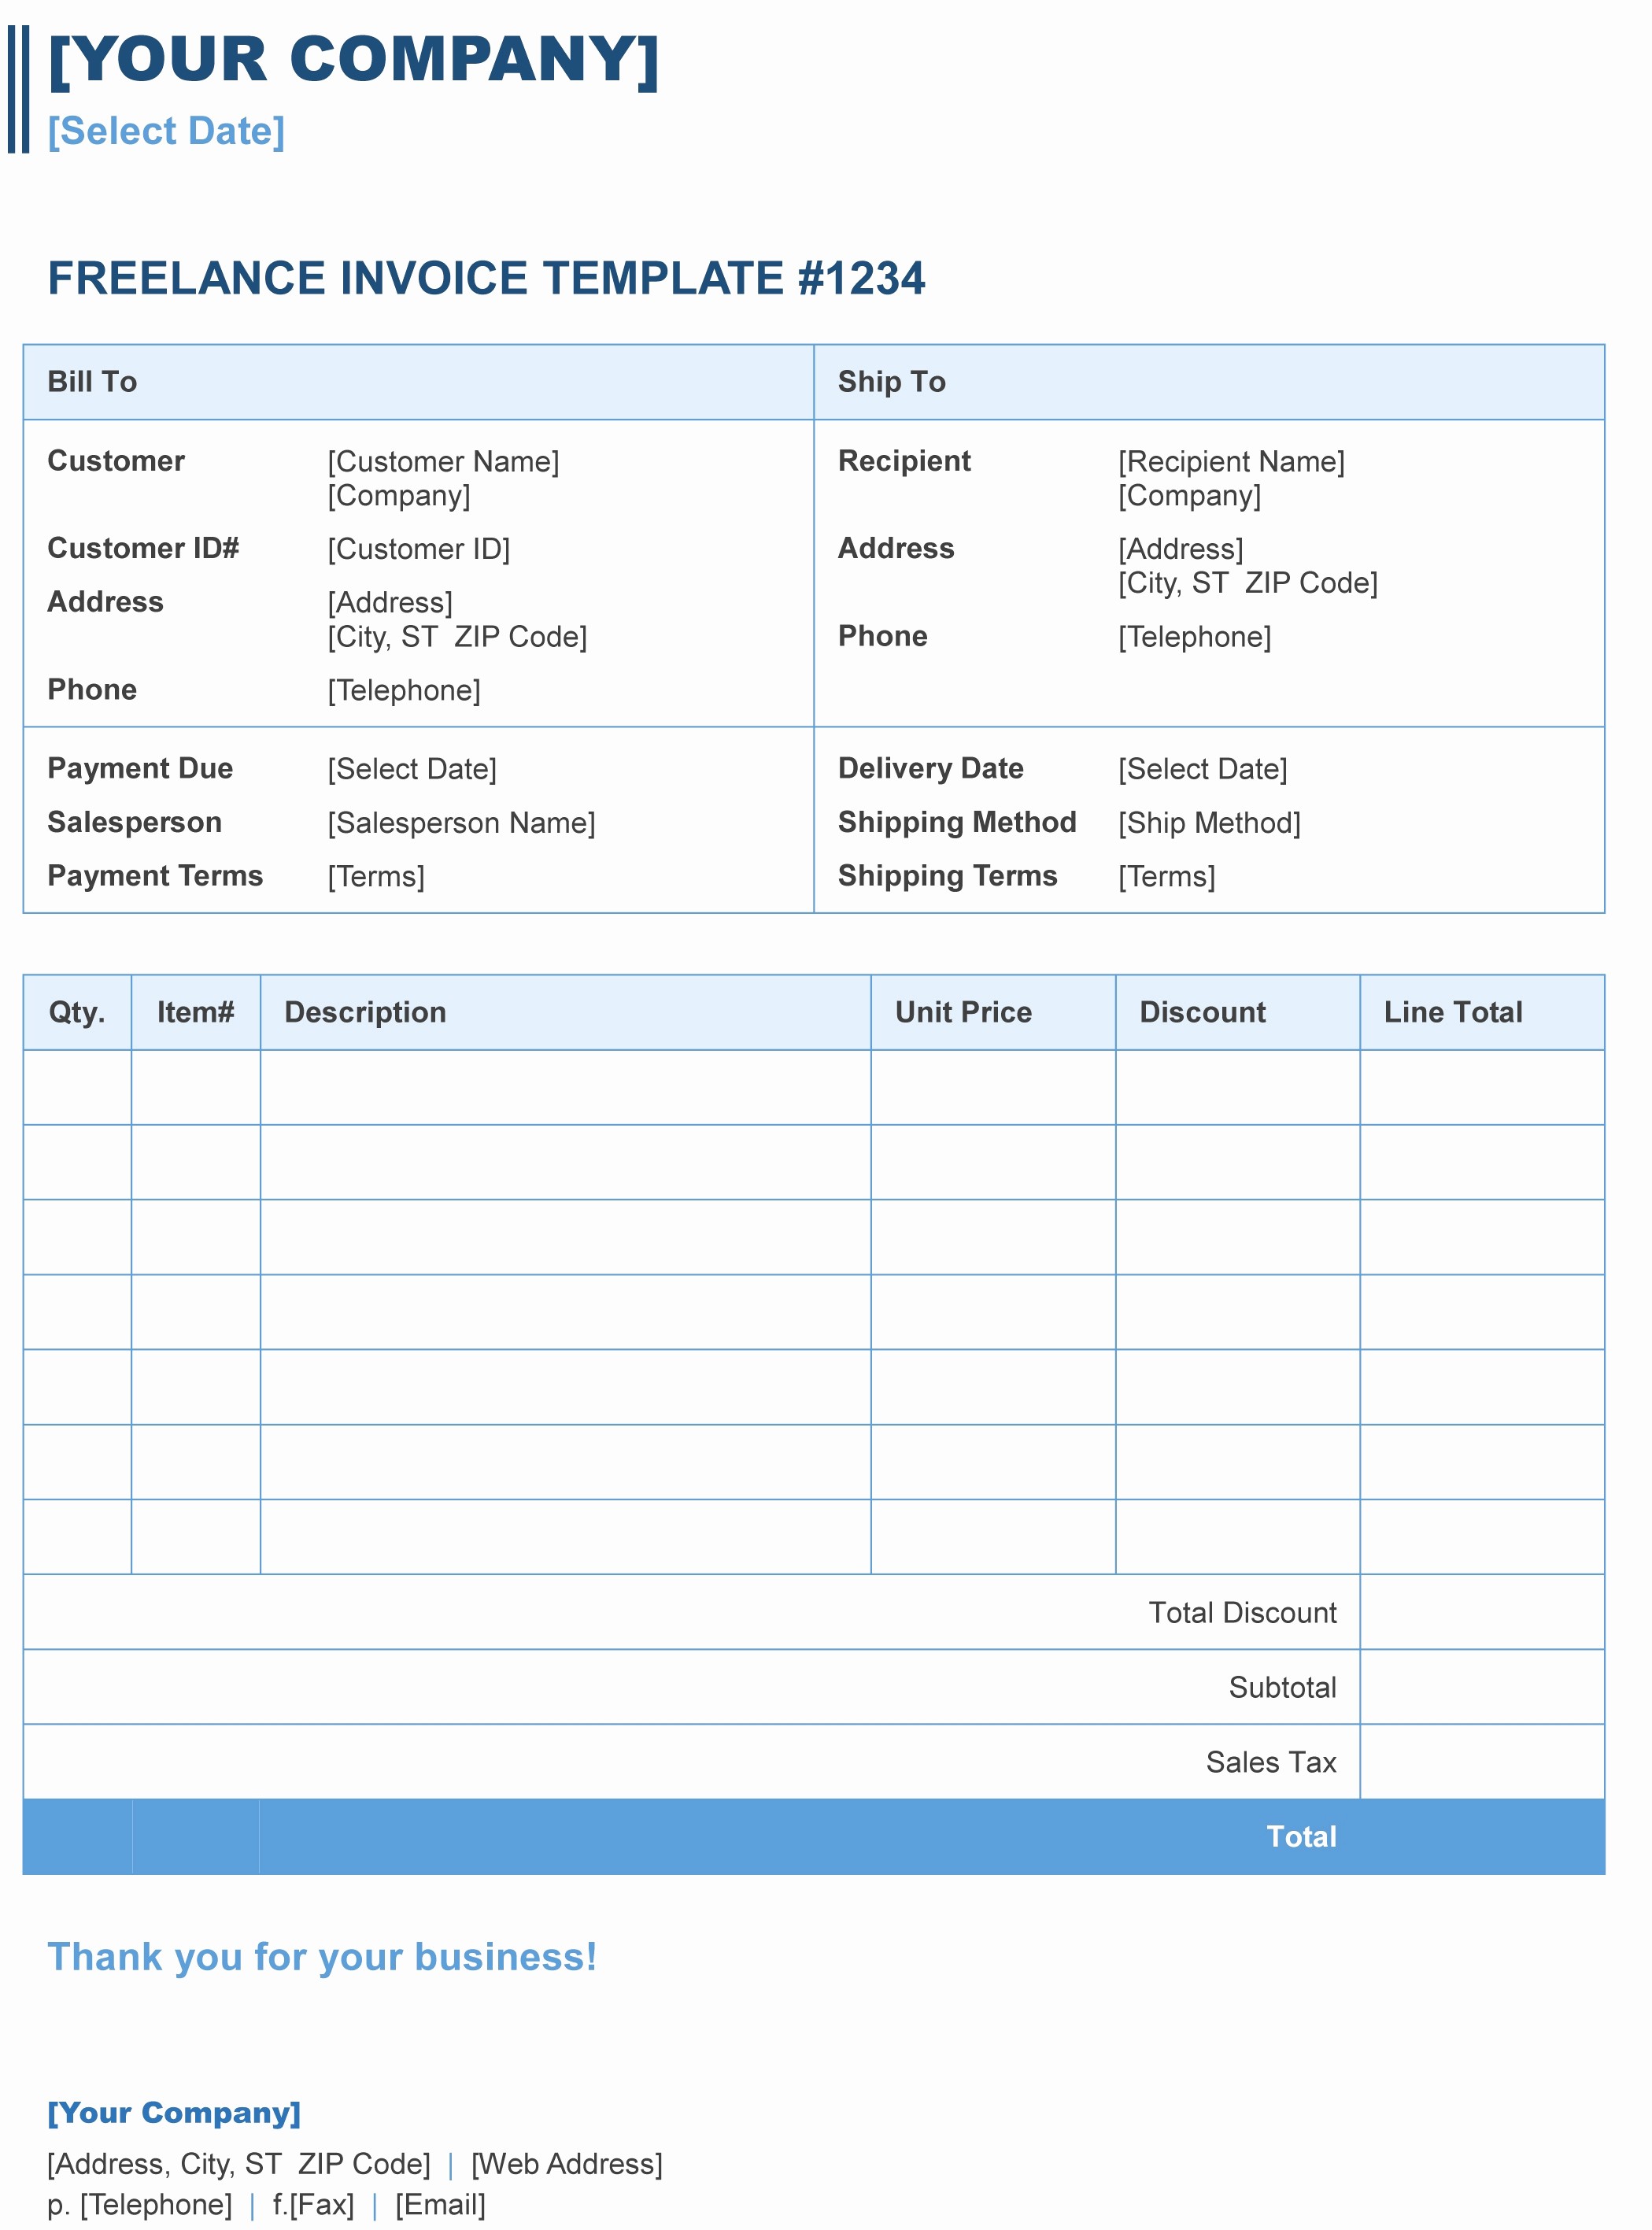 Free Invoice Template for Excel New Freelance Invoice Template Excel